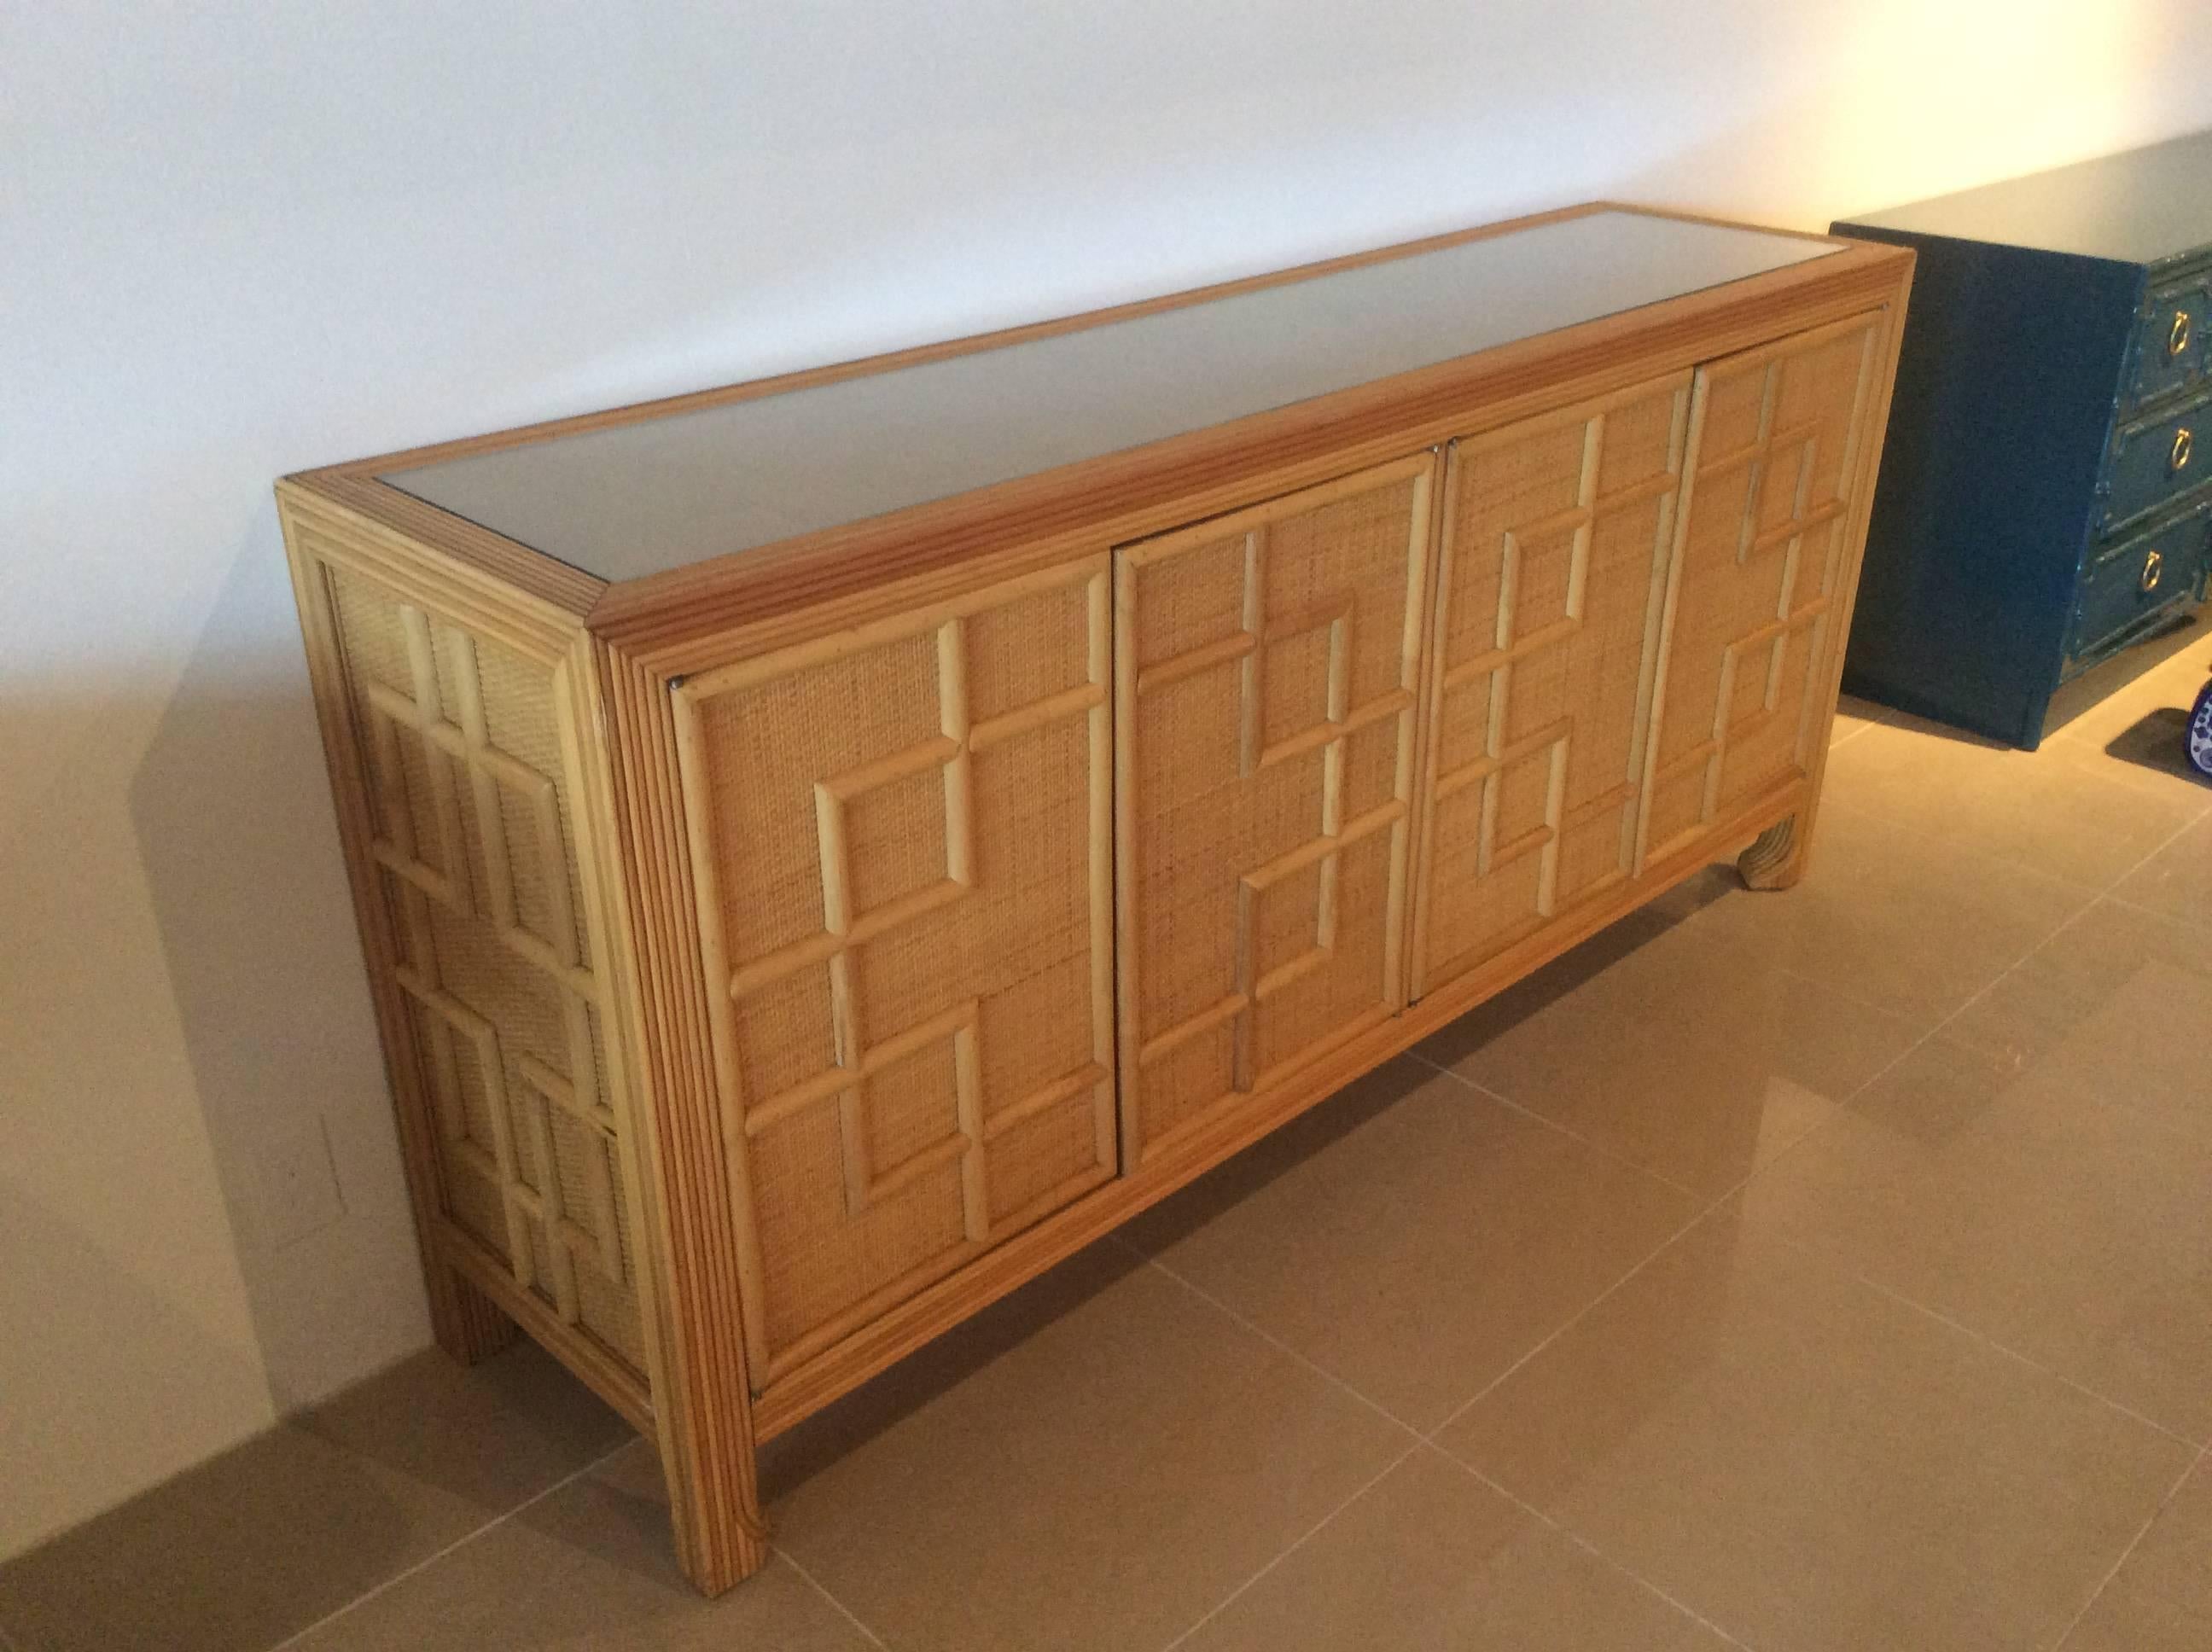 20th Century Pencil Reed Bamboo Rattan Wicker Credenza Vintage Buffet Sideboard Dresser